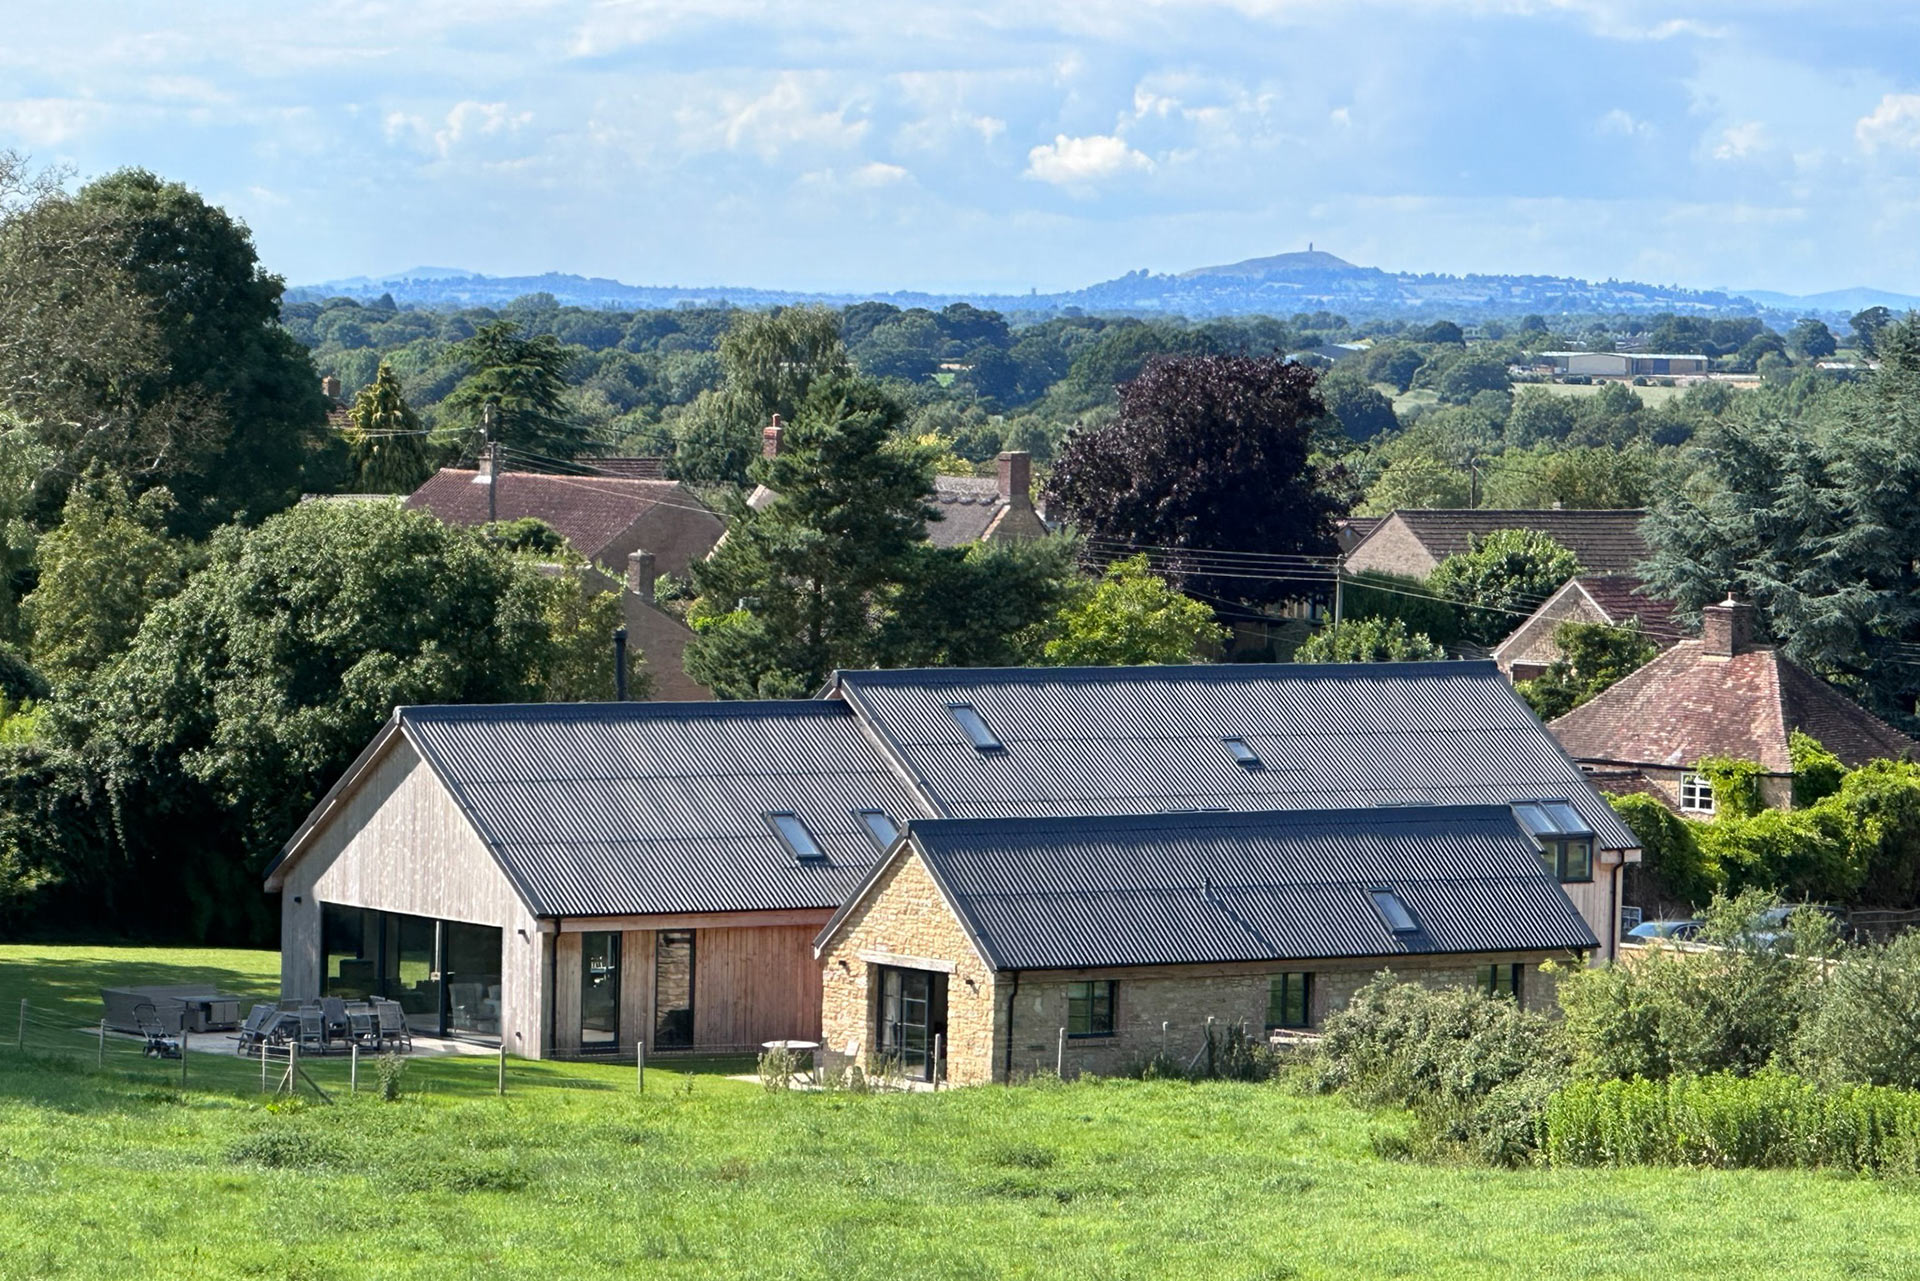 modern barn conversion in stone and timber cladding with beautiful countryside views